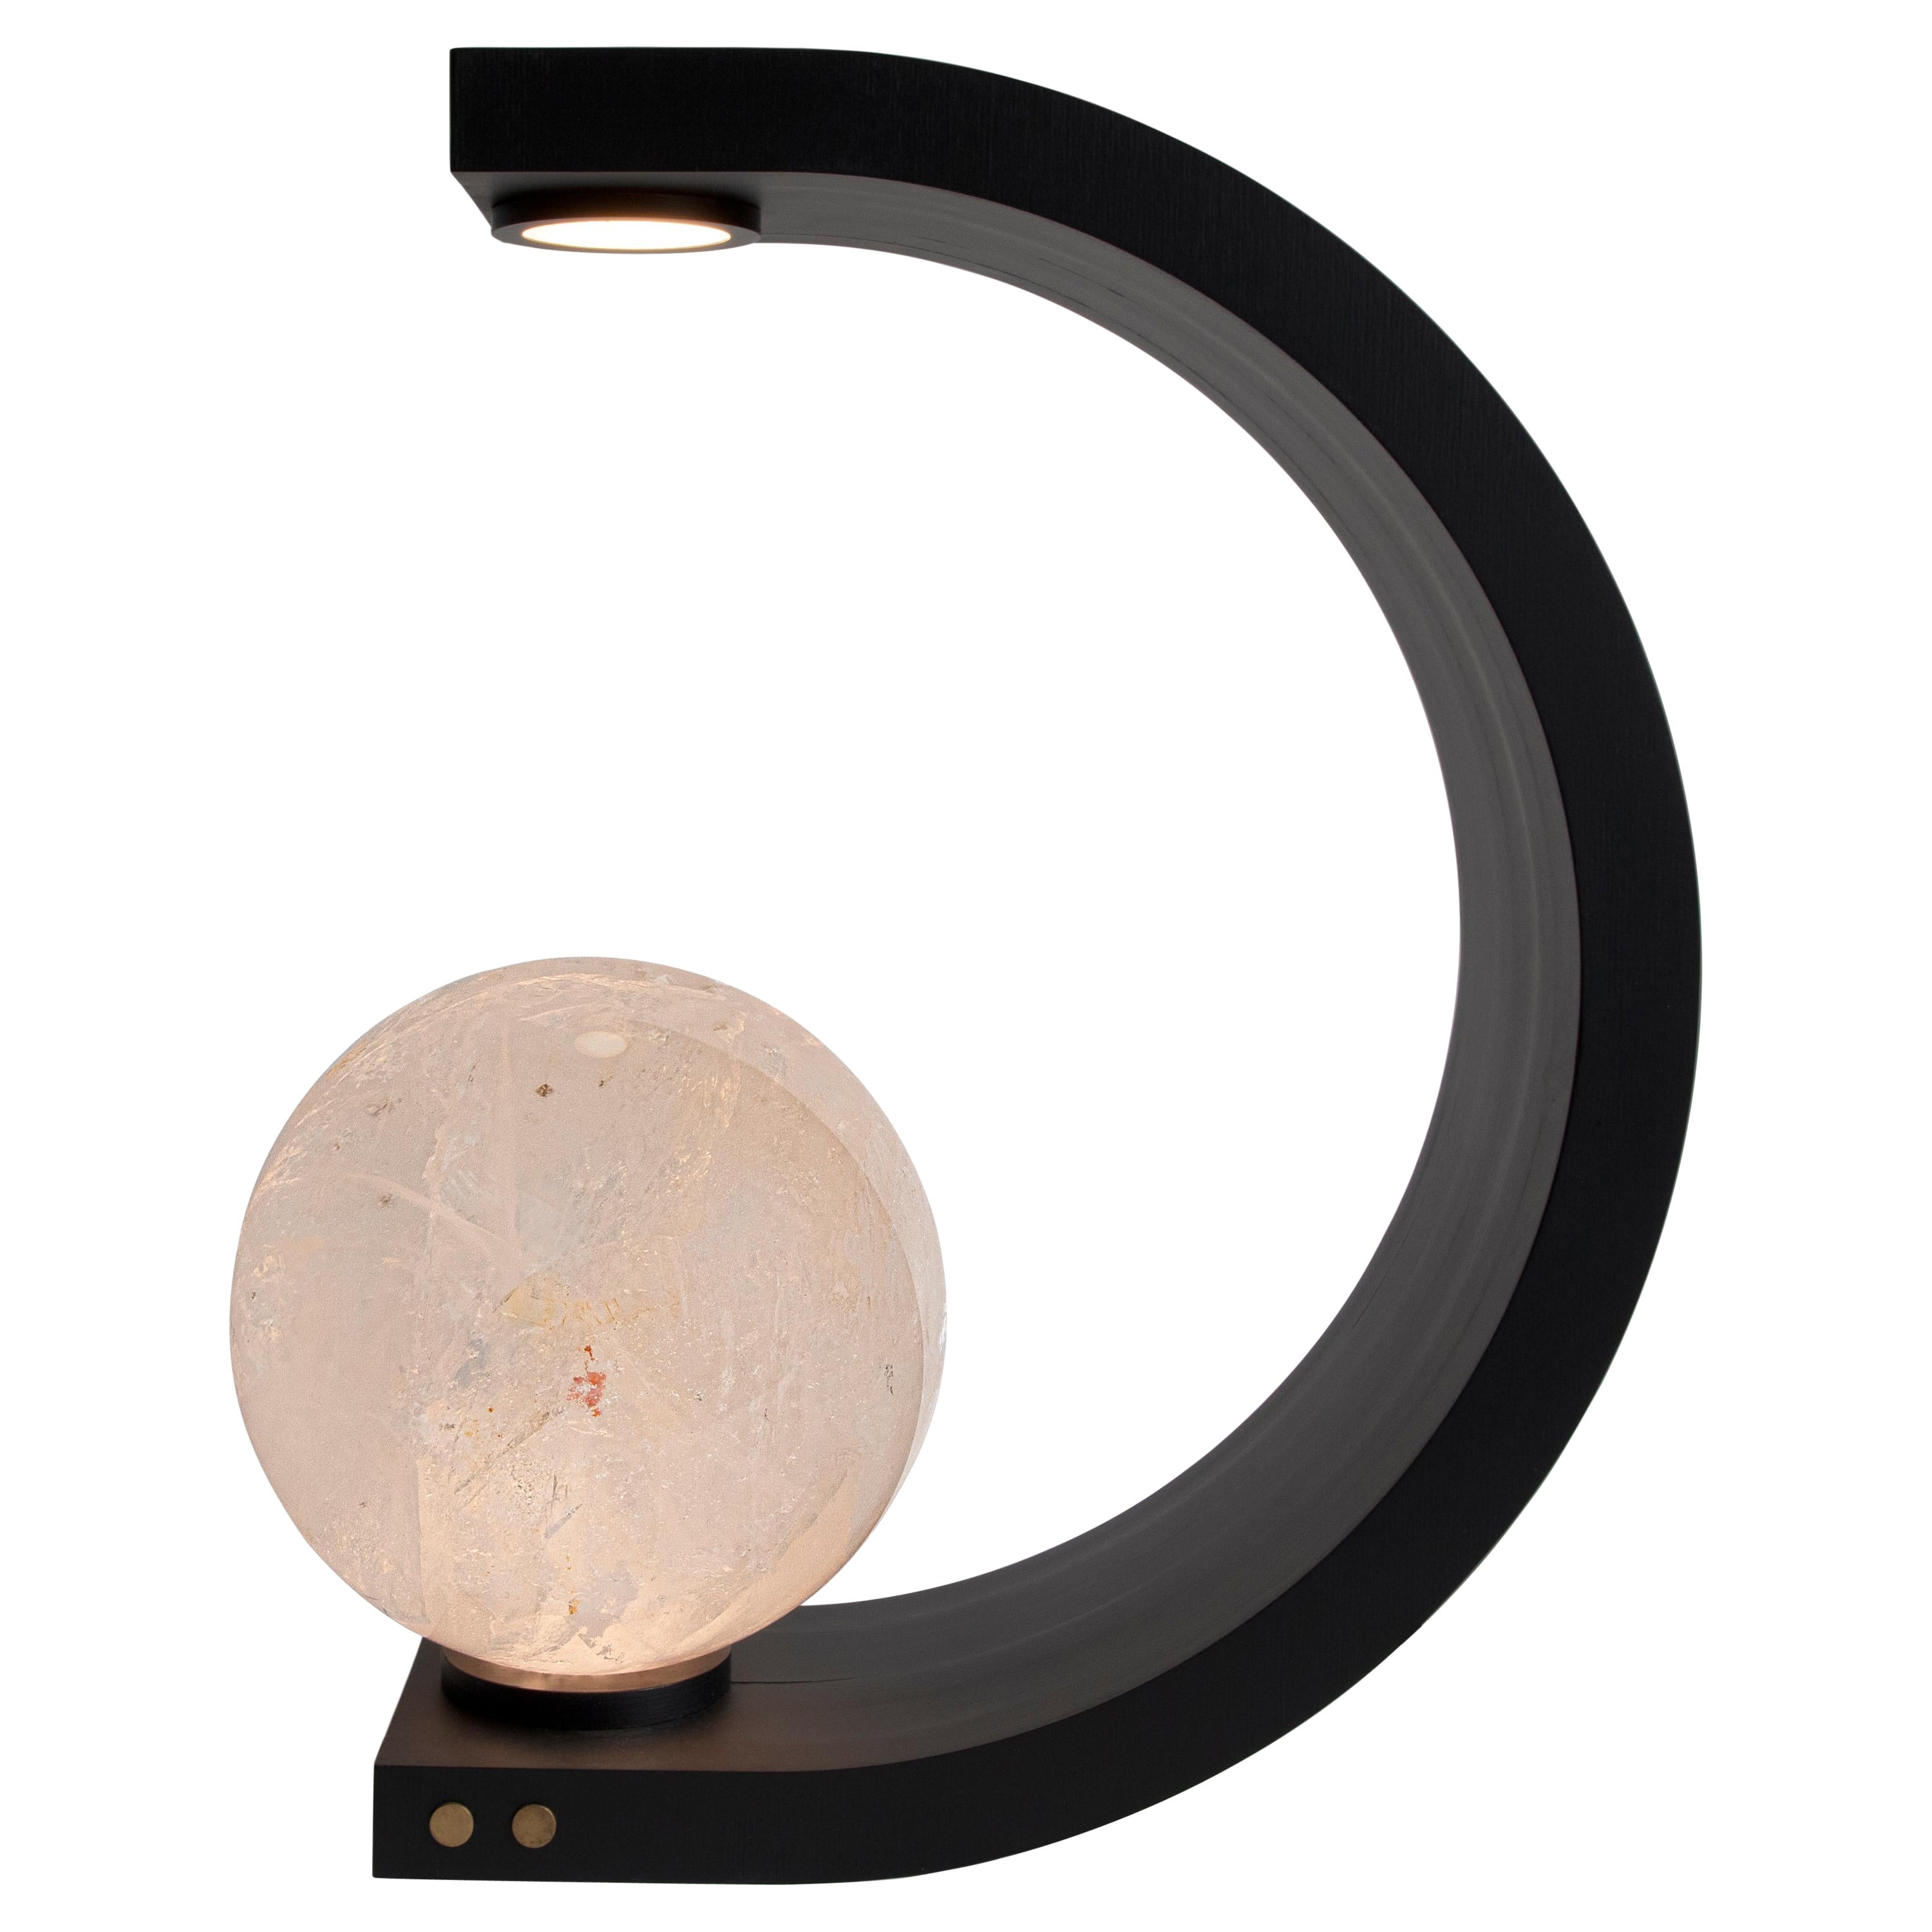 Hotai I Table Lamp by Sten Studio, Represented by Tuleste Factory For Sale